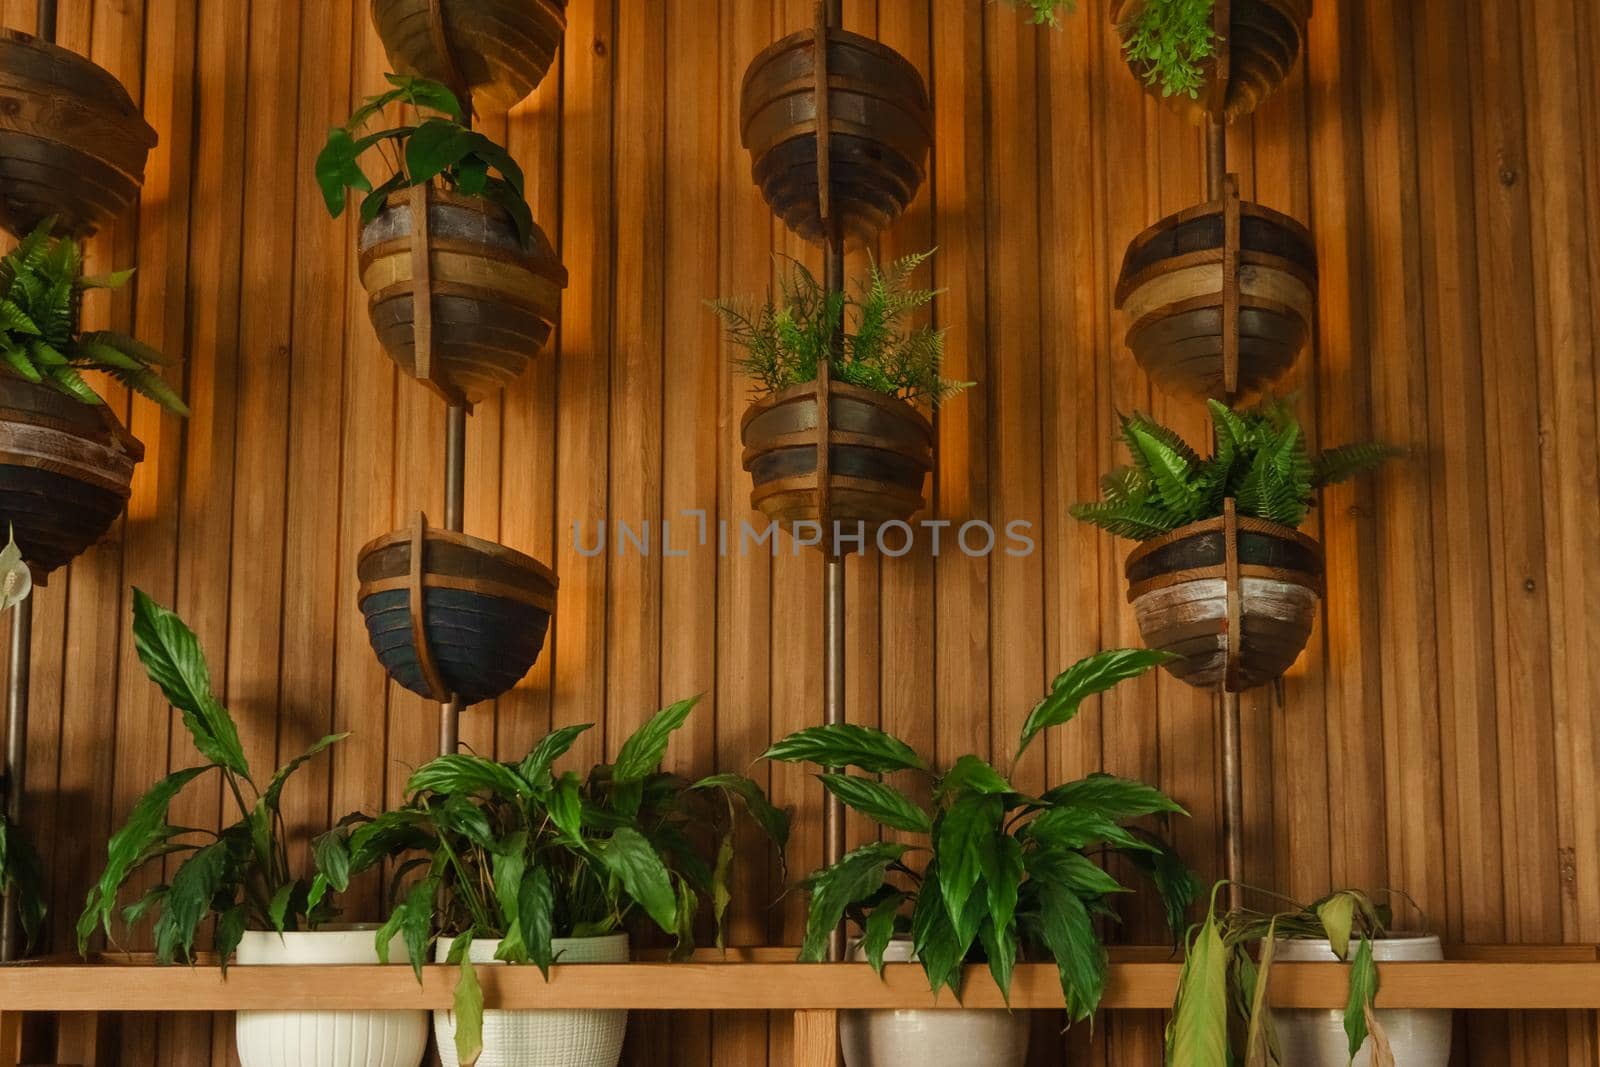 Cafe interior with elements of biophilic design. The concept of biophilia.